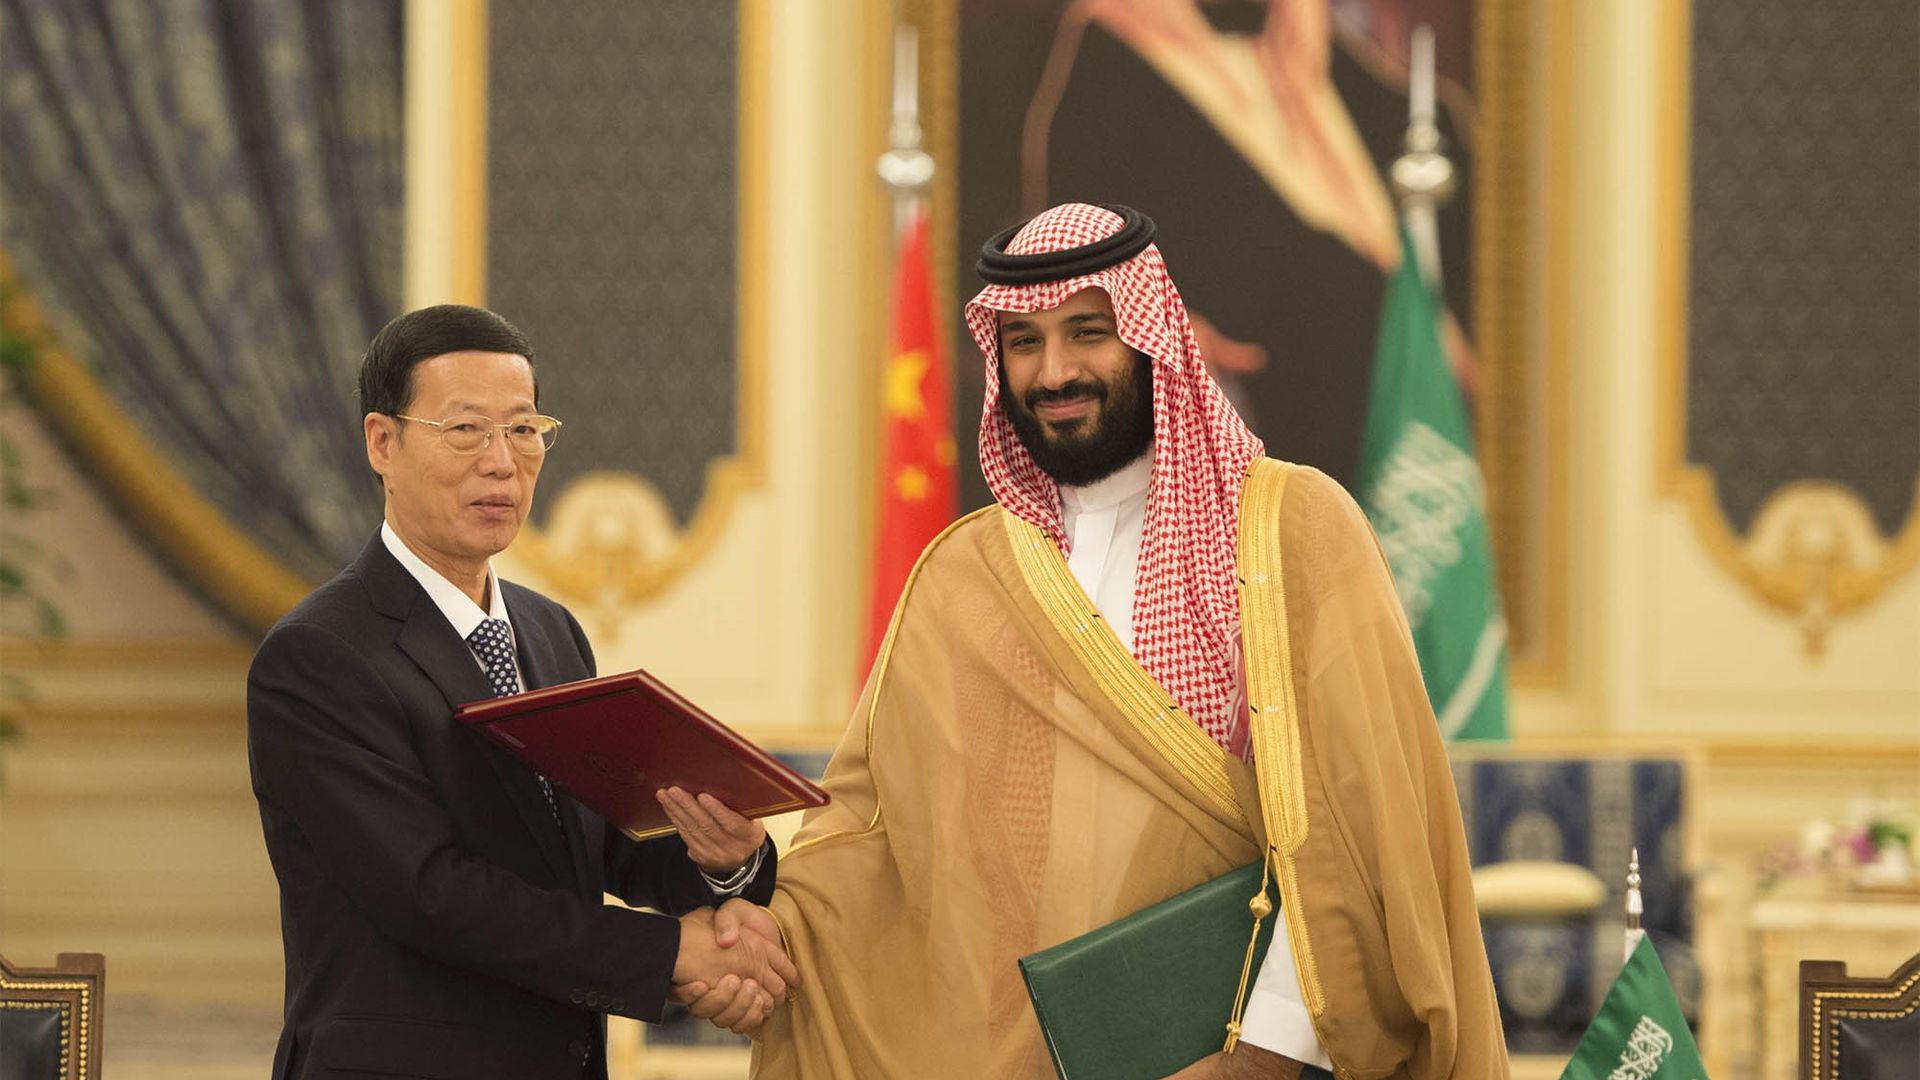 In this image, Saudi Crown Prince Mohammed bin Salman shakes hands with a Chinese diplomat in front of the Chinese and Saudi Arabian flags.